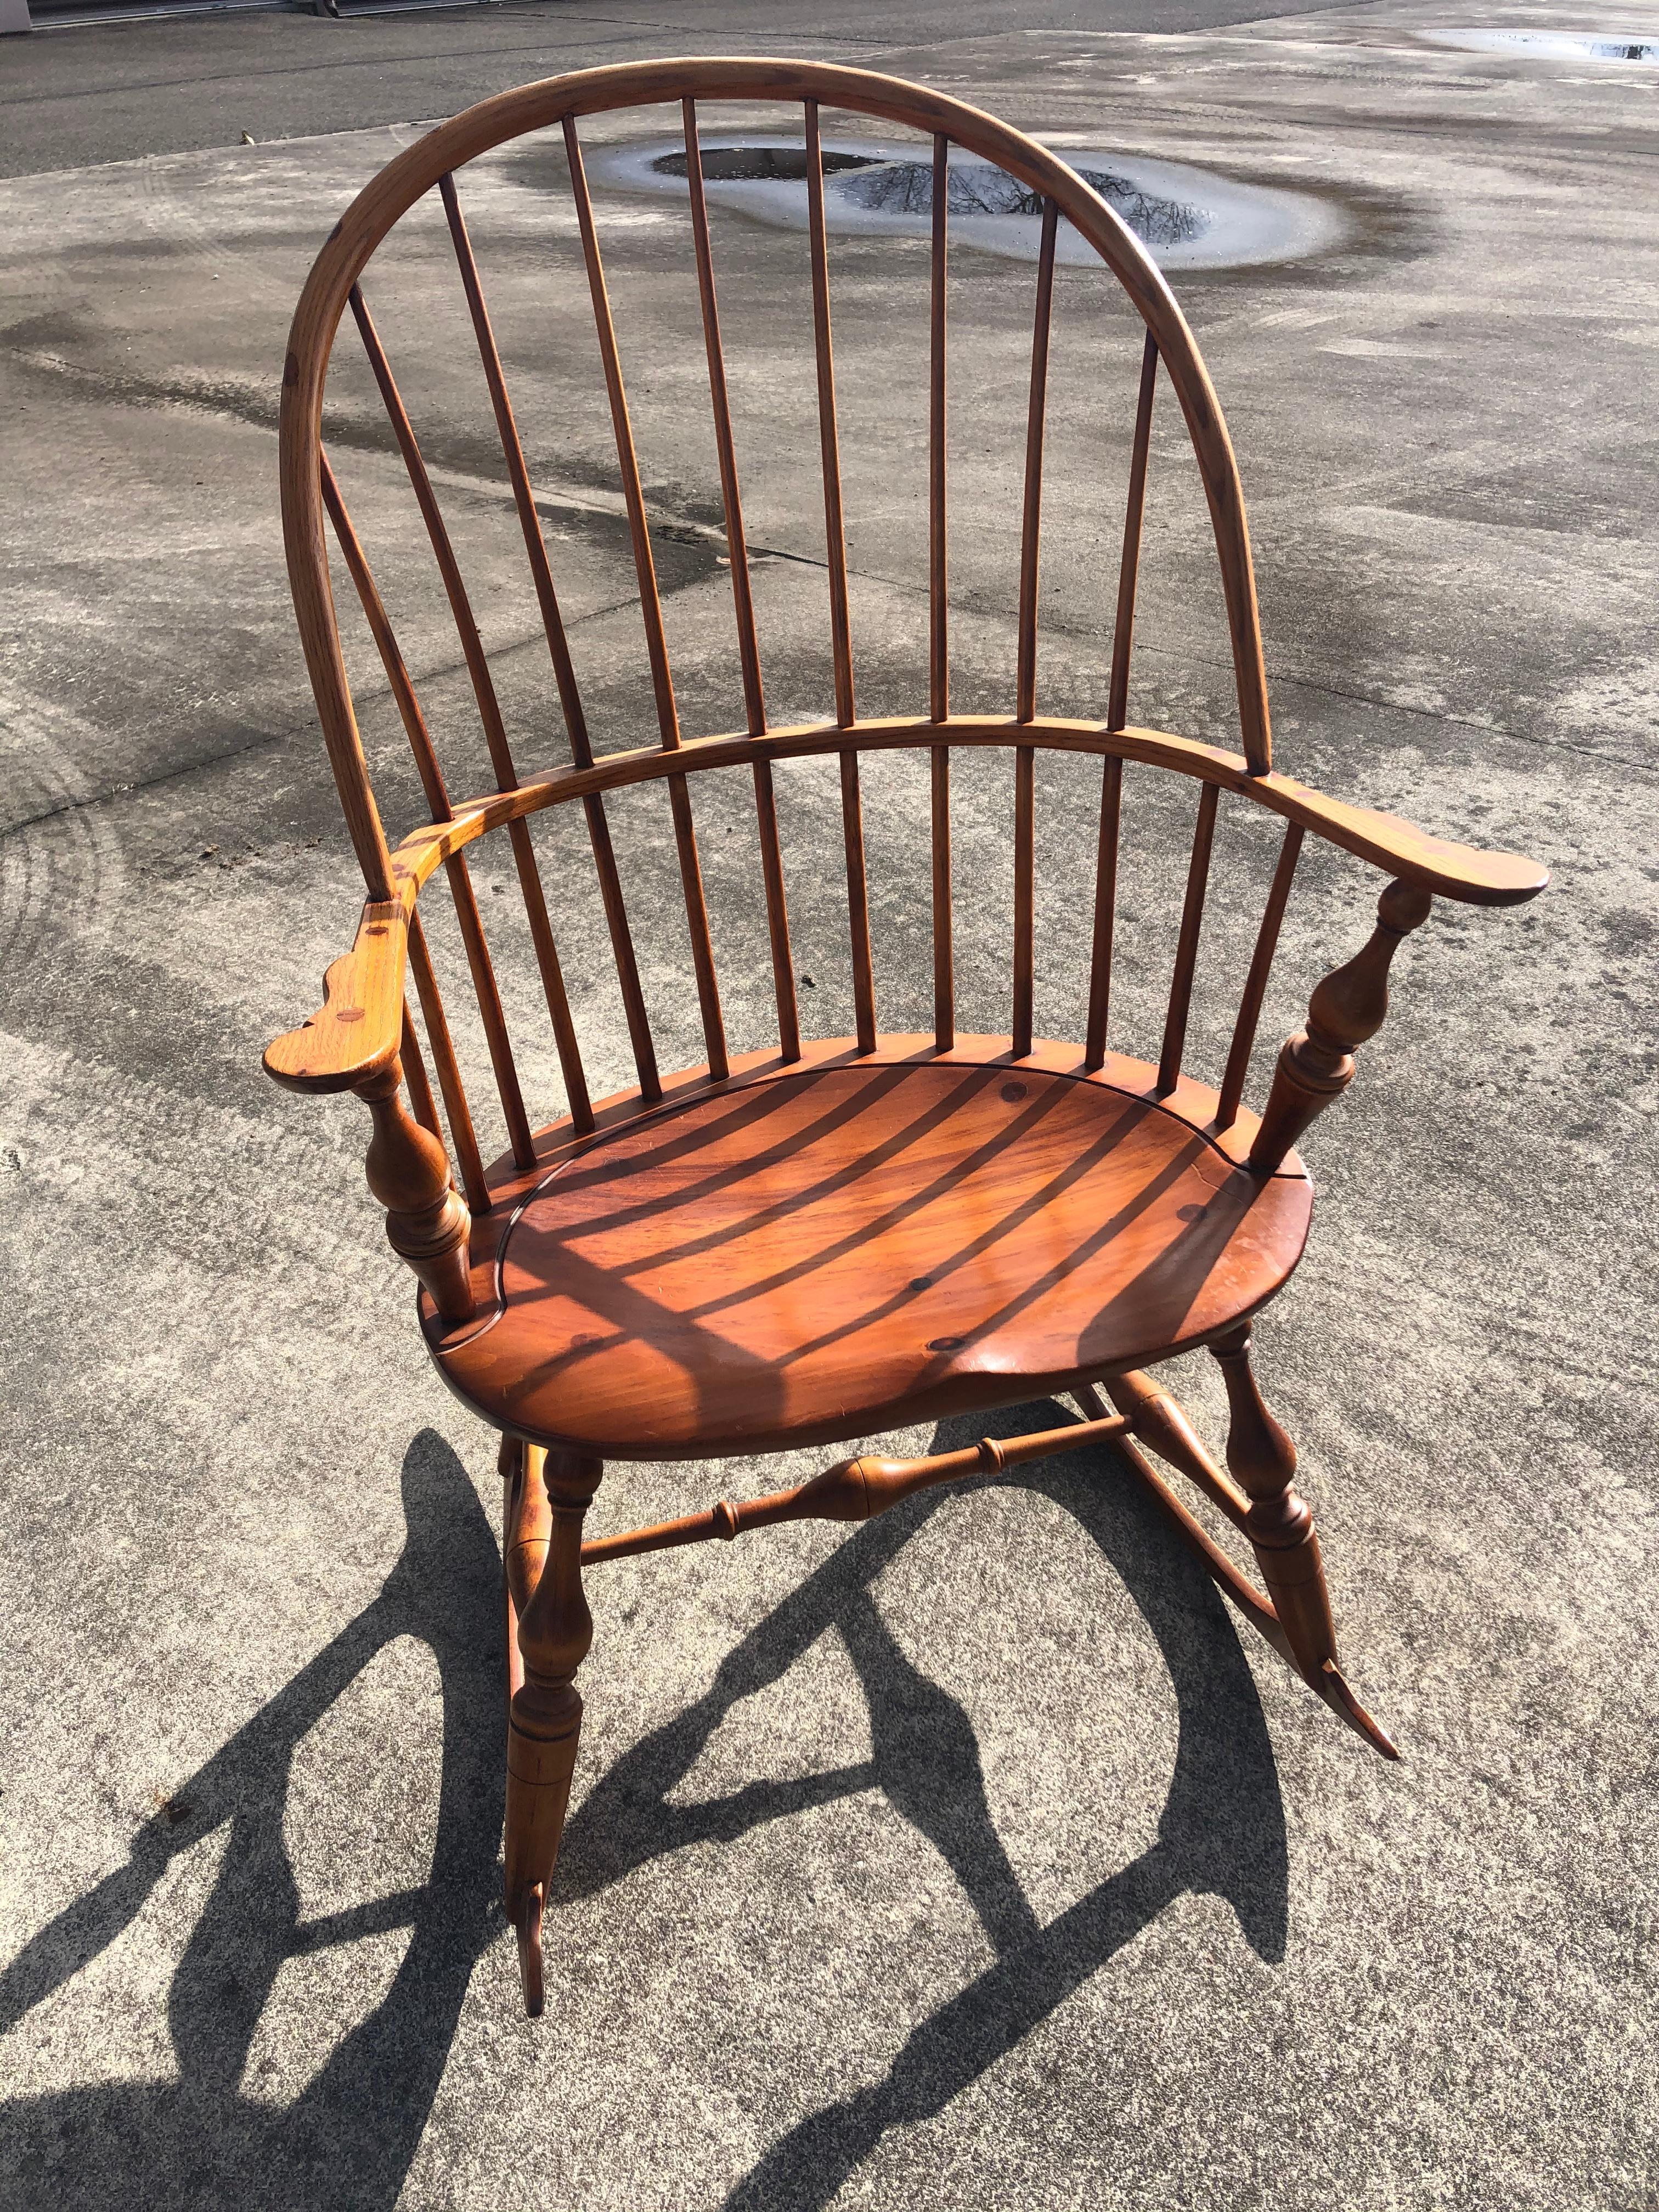 Beautifully made Windsor style rocking chair in what looks like maple, having modeled seat and fine spindles on a curved back. The legs are also lovely turned wood and the whole rocking chair is elegant, not clunky at all. Comfortable too!
Measure: